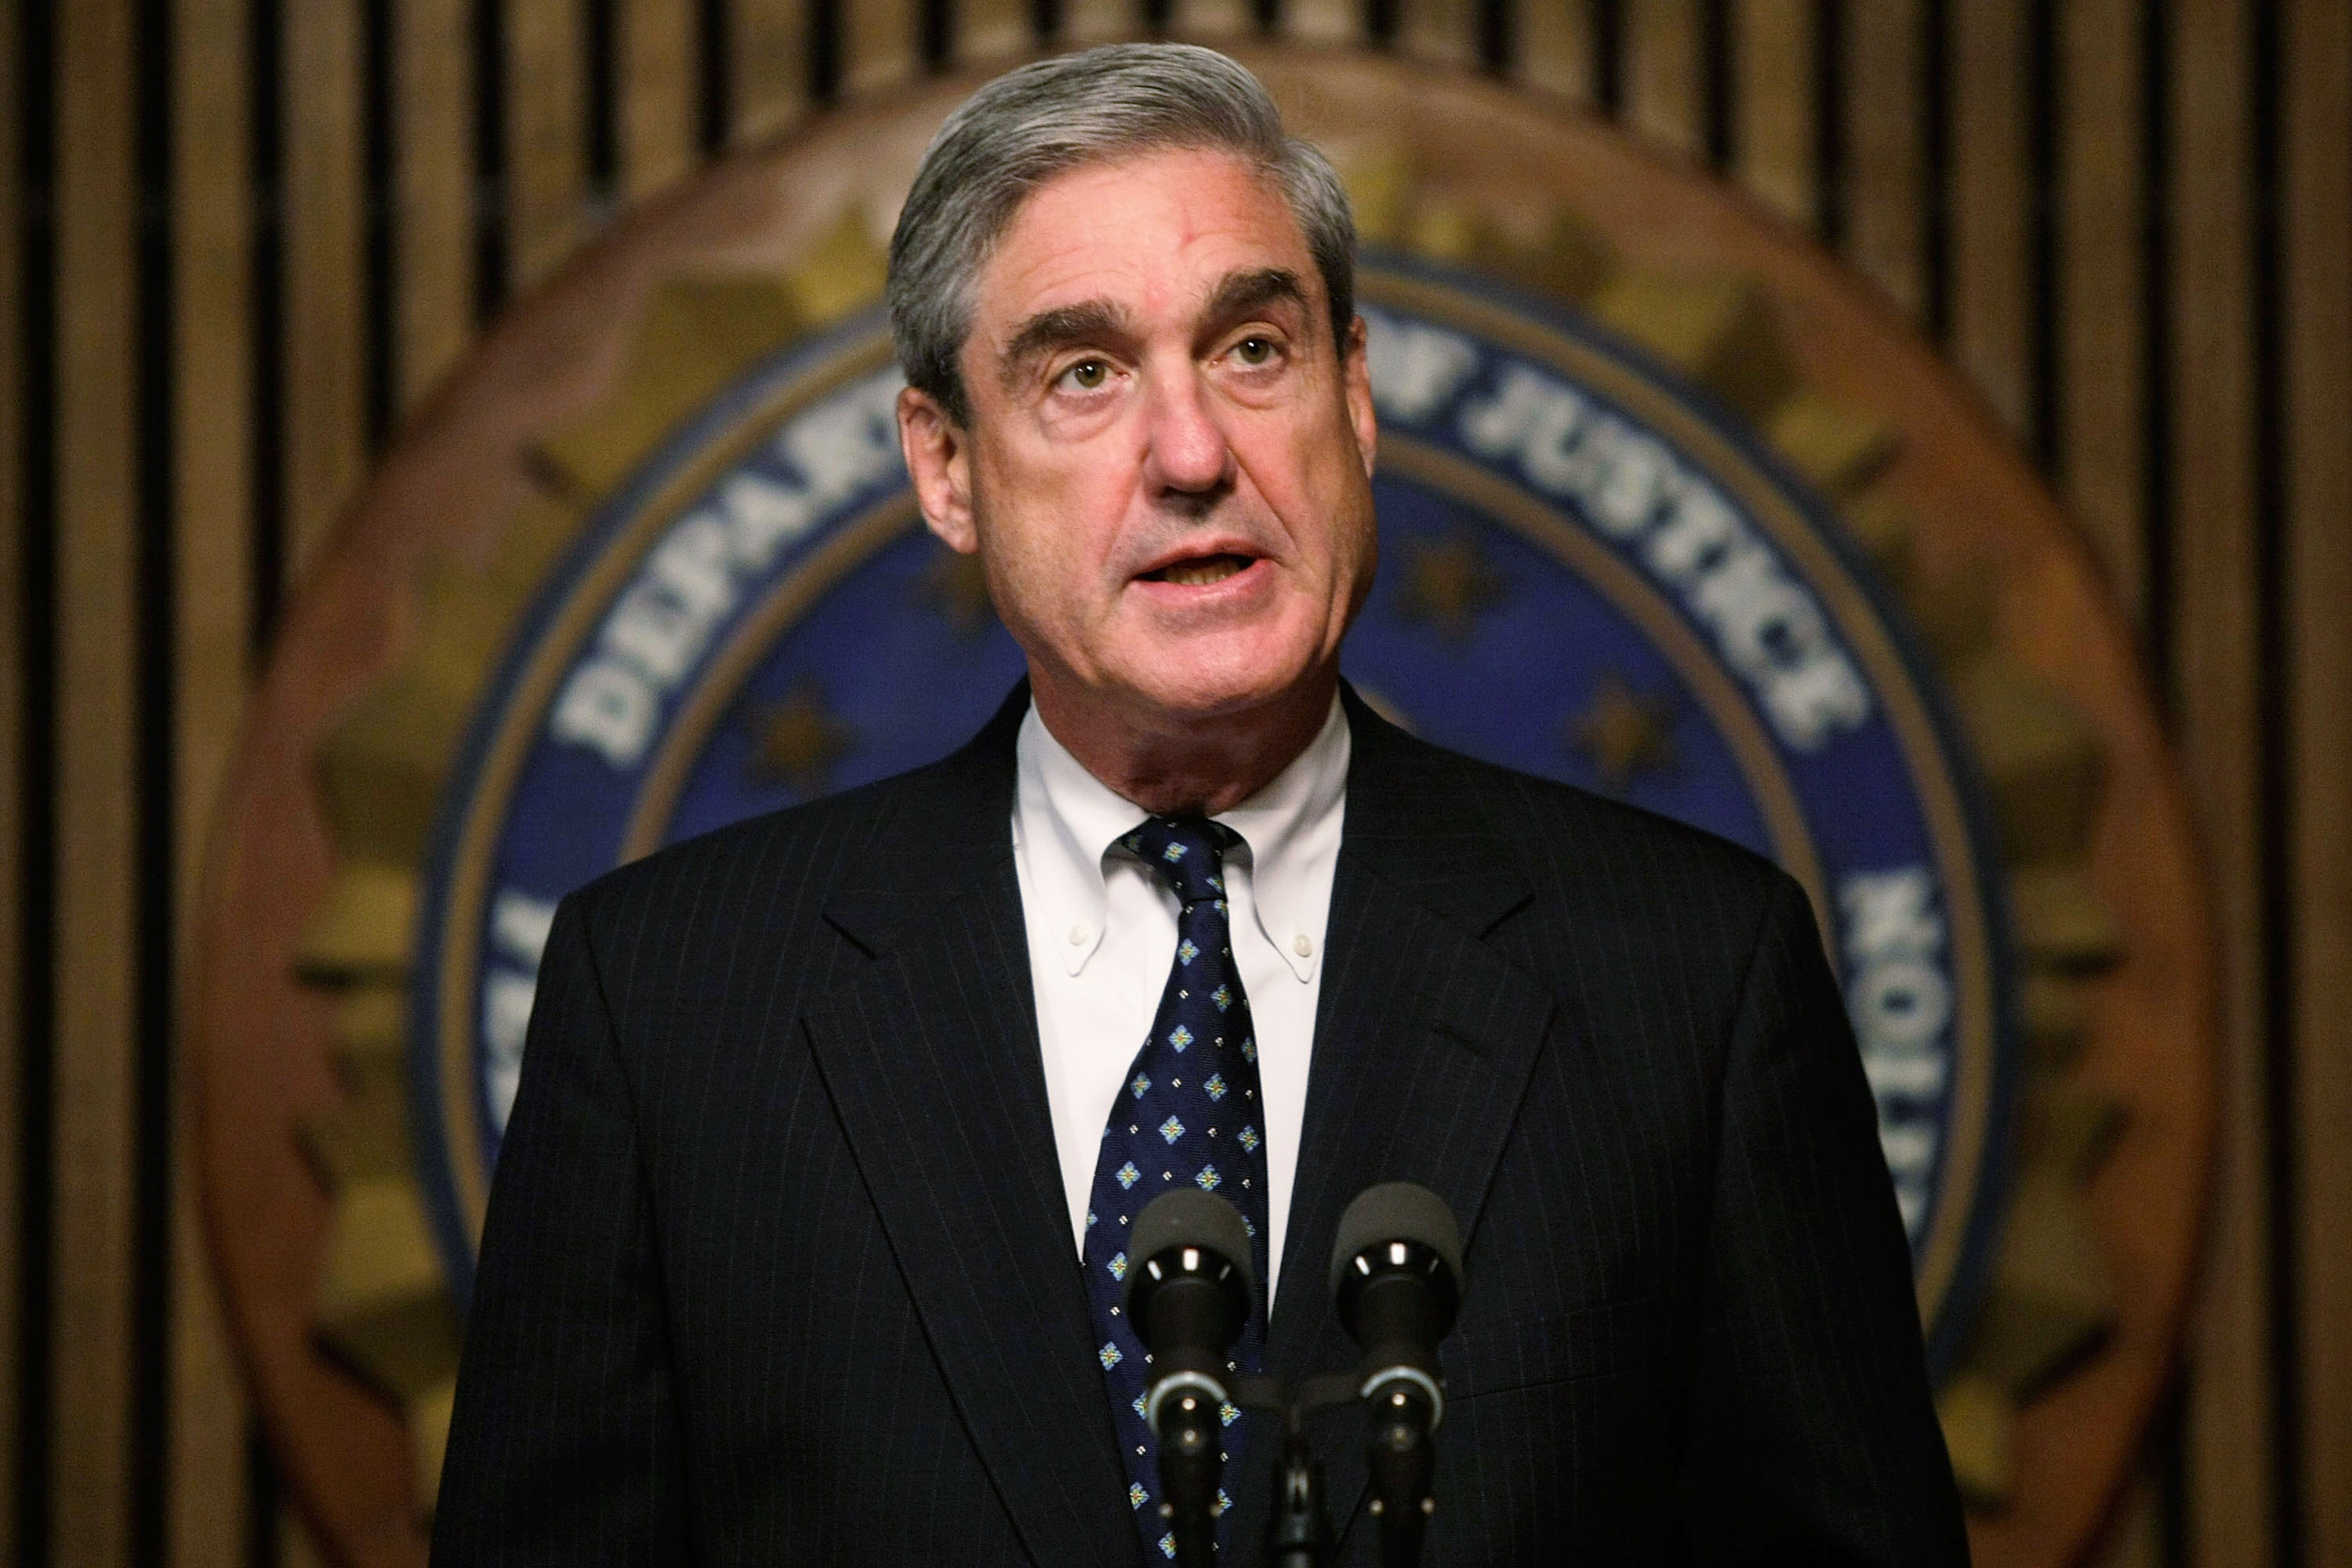 Robert Mueller speaks during a news conference at the FBI headquarters June 25, 2008 in Washington, DC. (Alex Wong—Getty Images)